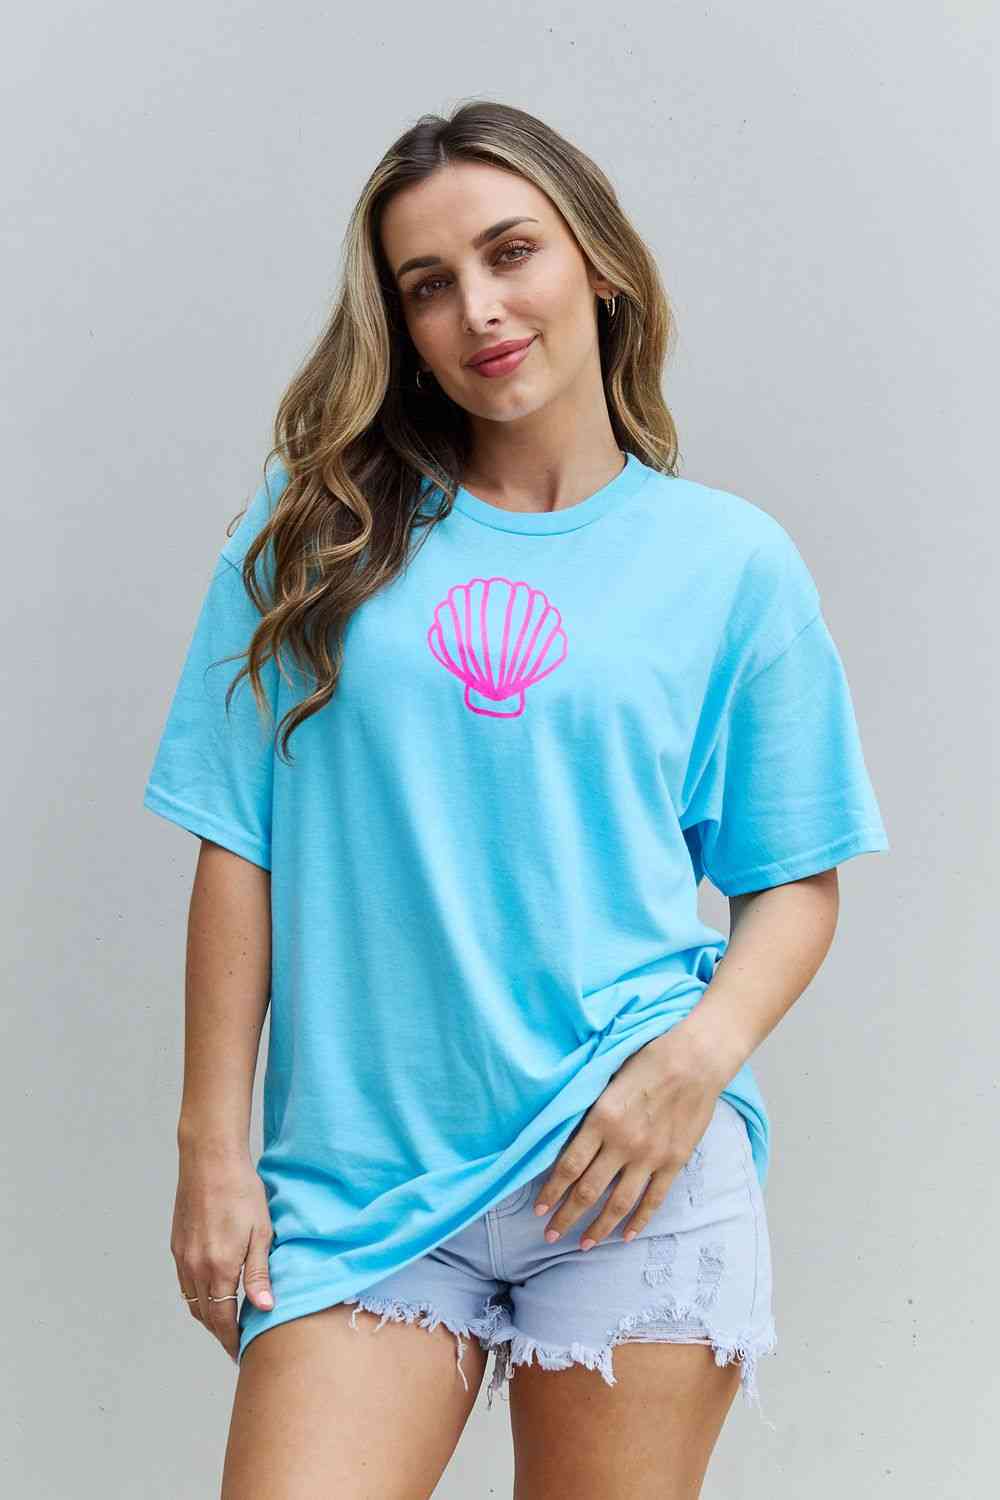 Women's Sweet Claire "More Beach Days" Oversized Graphic T-Shirt